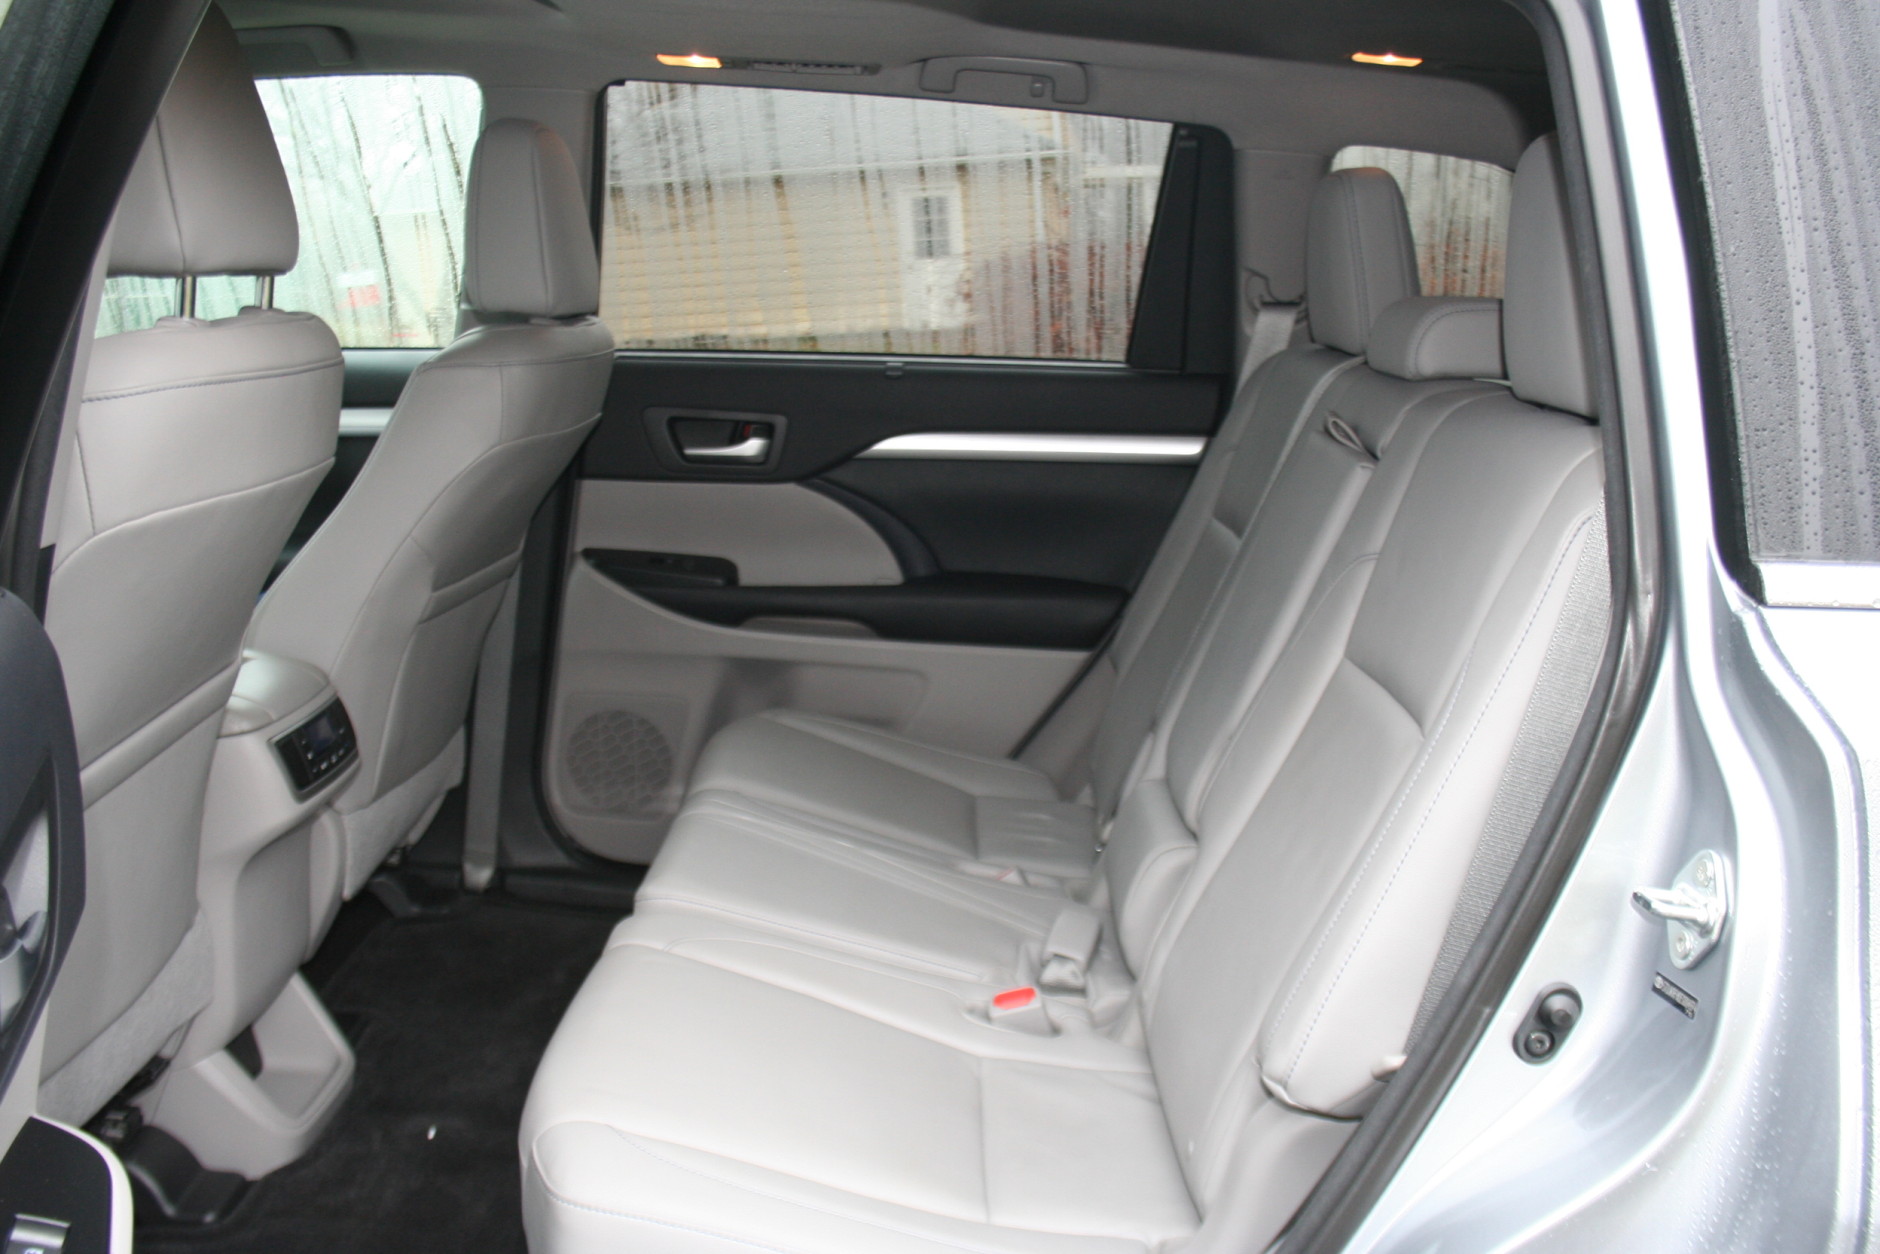 The new 2015 Highlander has more space than before. (WTOP/Mike Parris)